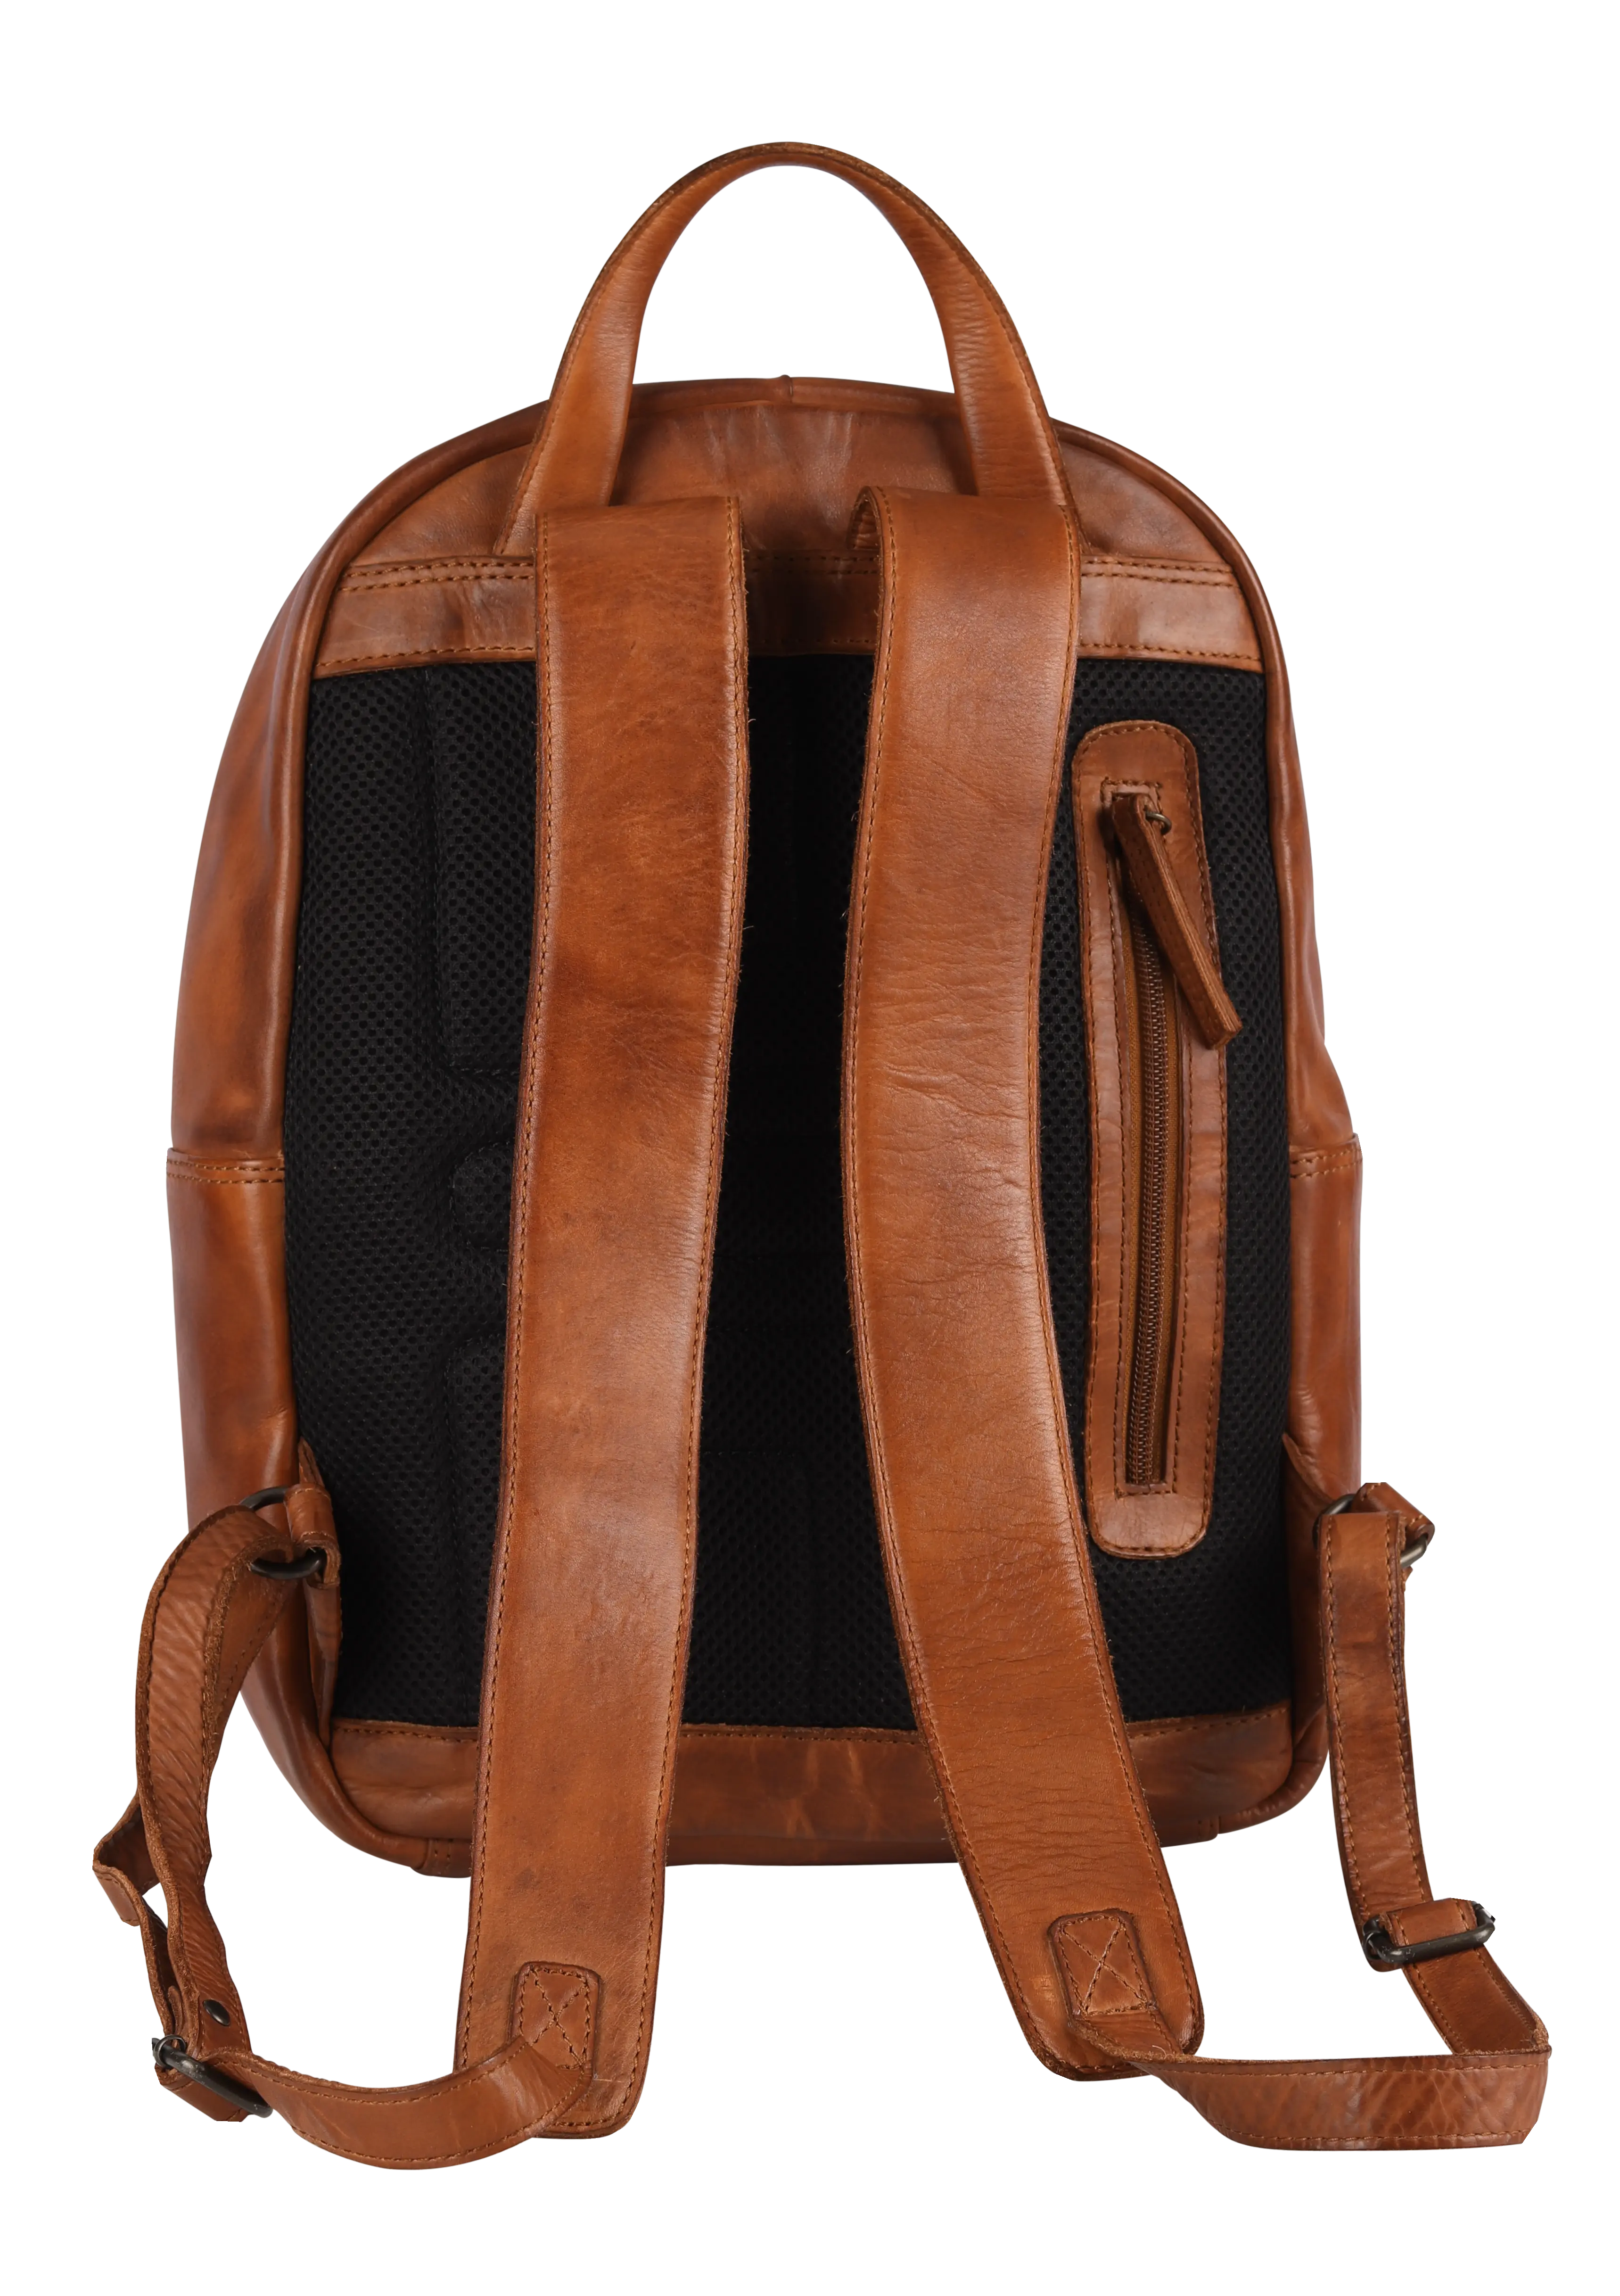 BOL/Open Road Two Strap Adjustable Leather Backpack Backpacks & Messenger Bags Boutique of Leathers/Open Road